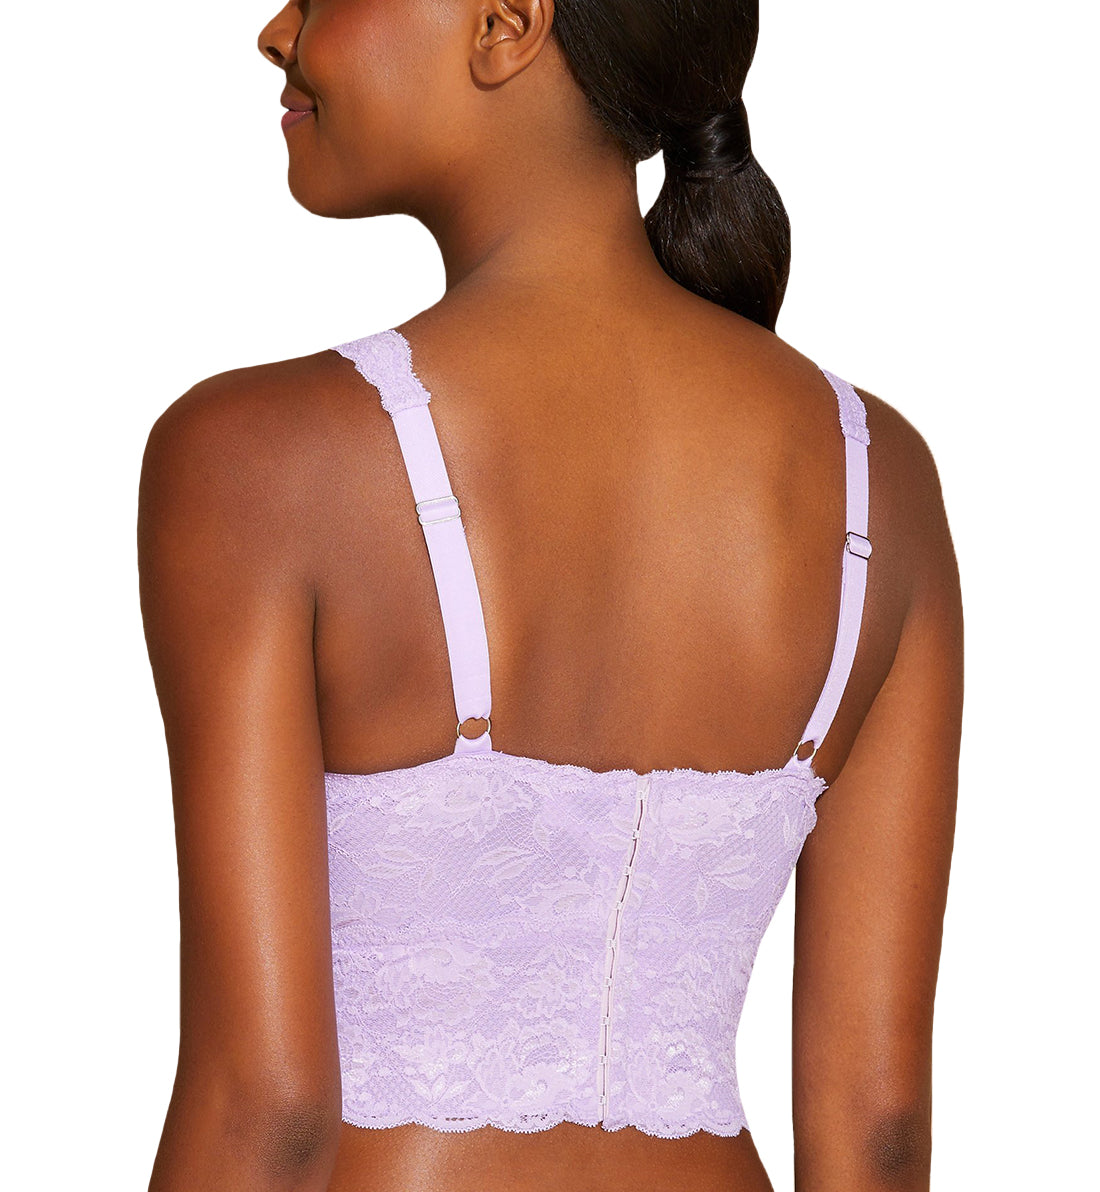 Cosabella Never Say Never CURVY Plungie Longline Bralette (NEVER1385),XS,Icy Violet - Icy Violet,XS